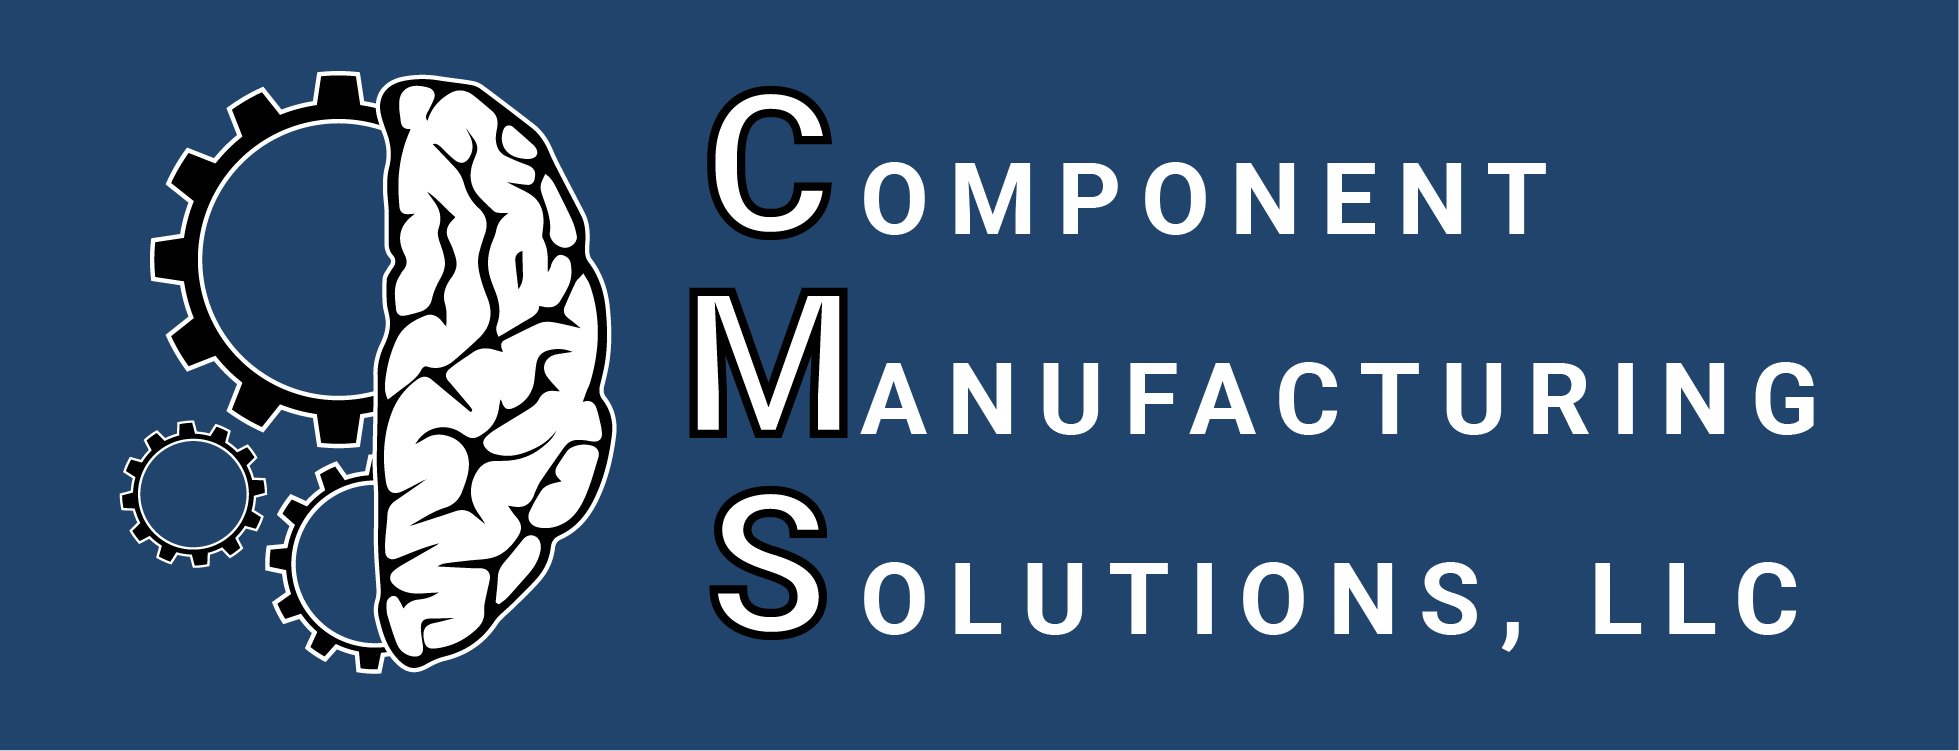 Component Manufacturing Solutions, LLC